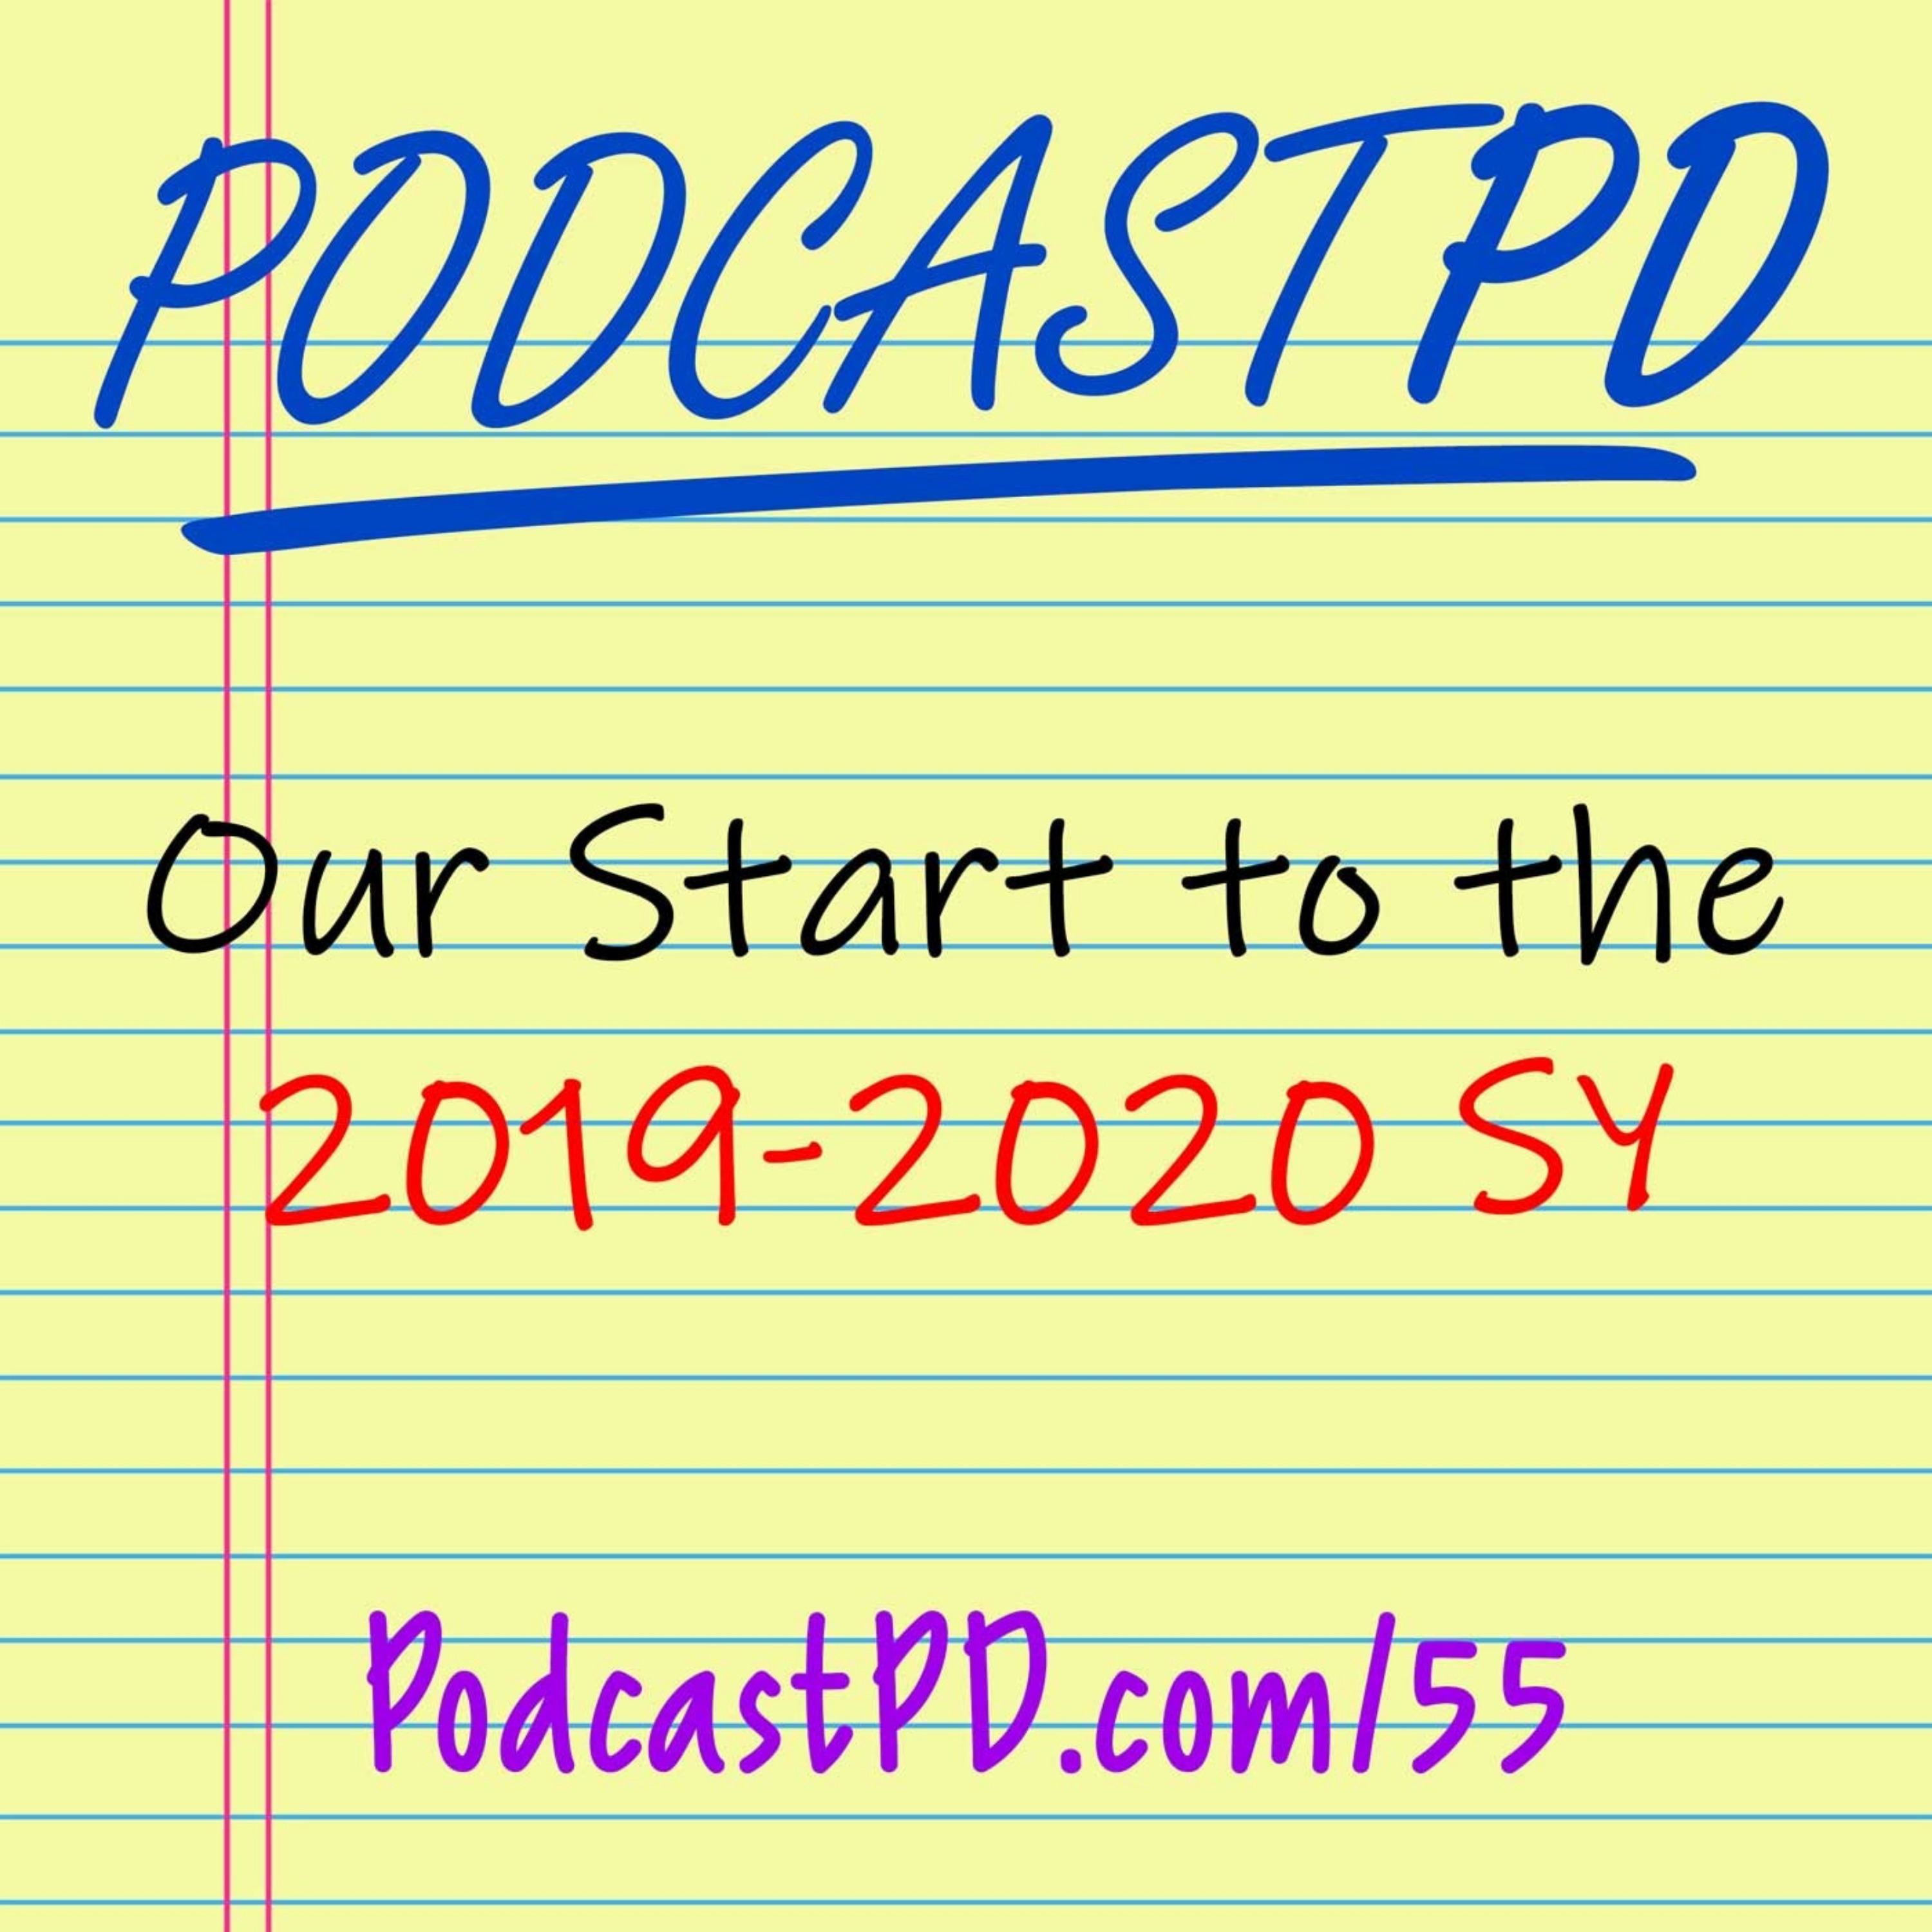 Our Start to the 2019-2020 School Year - PPD055 Image